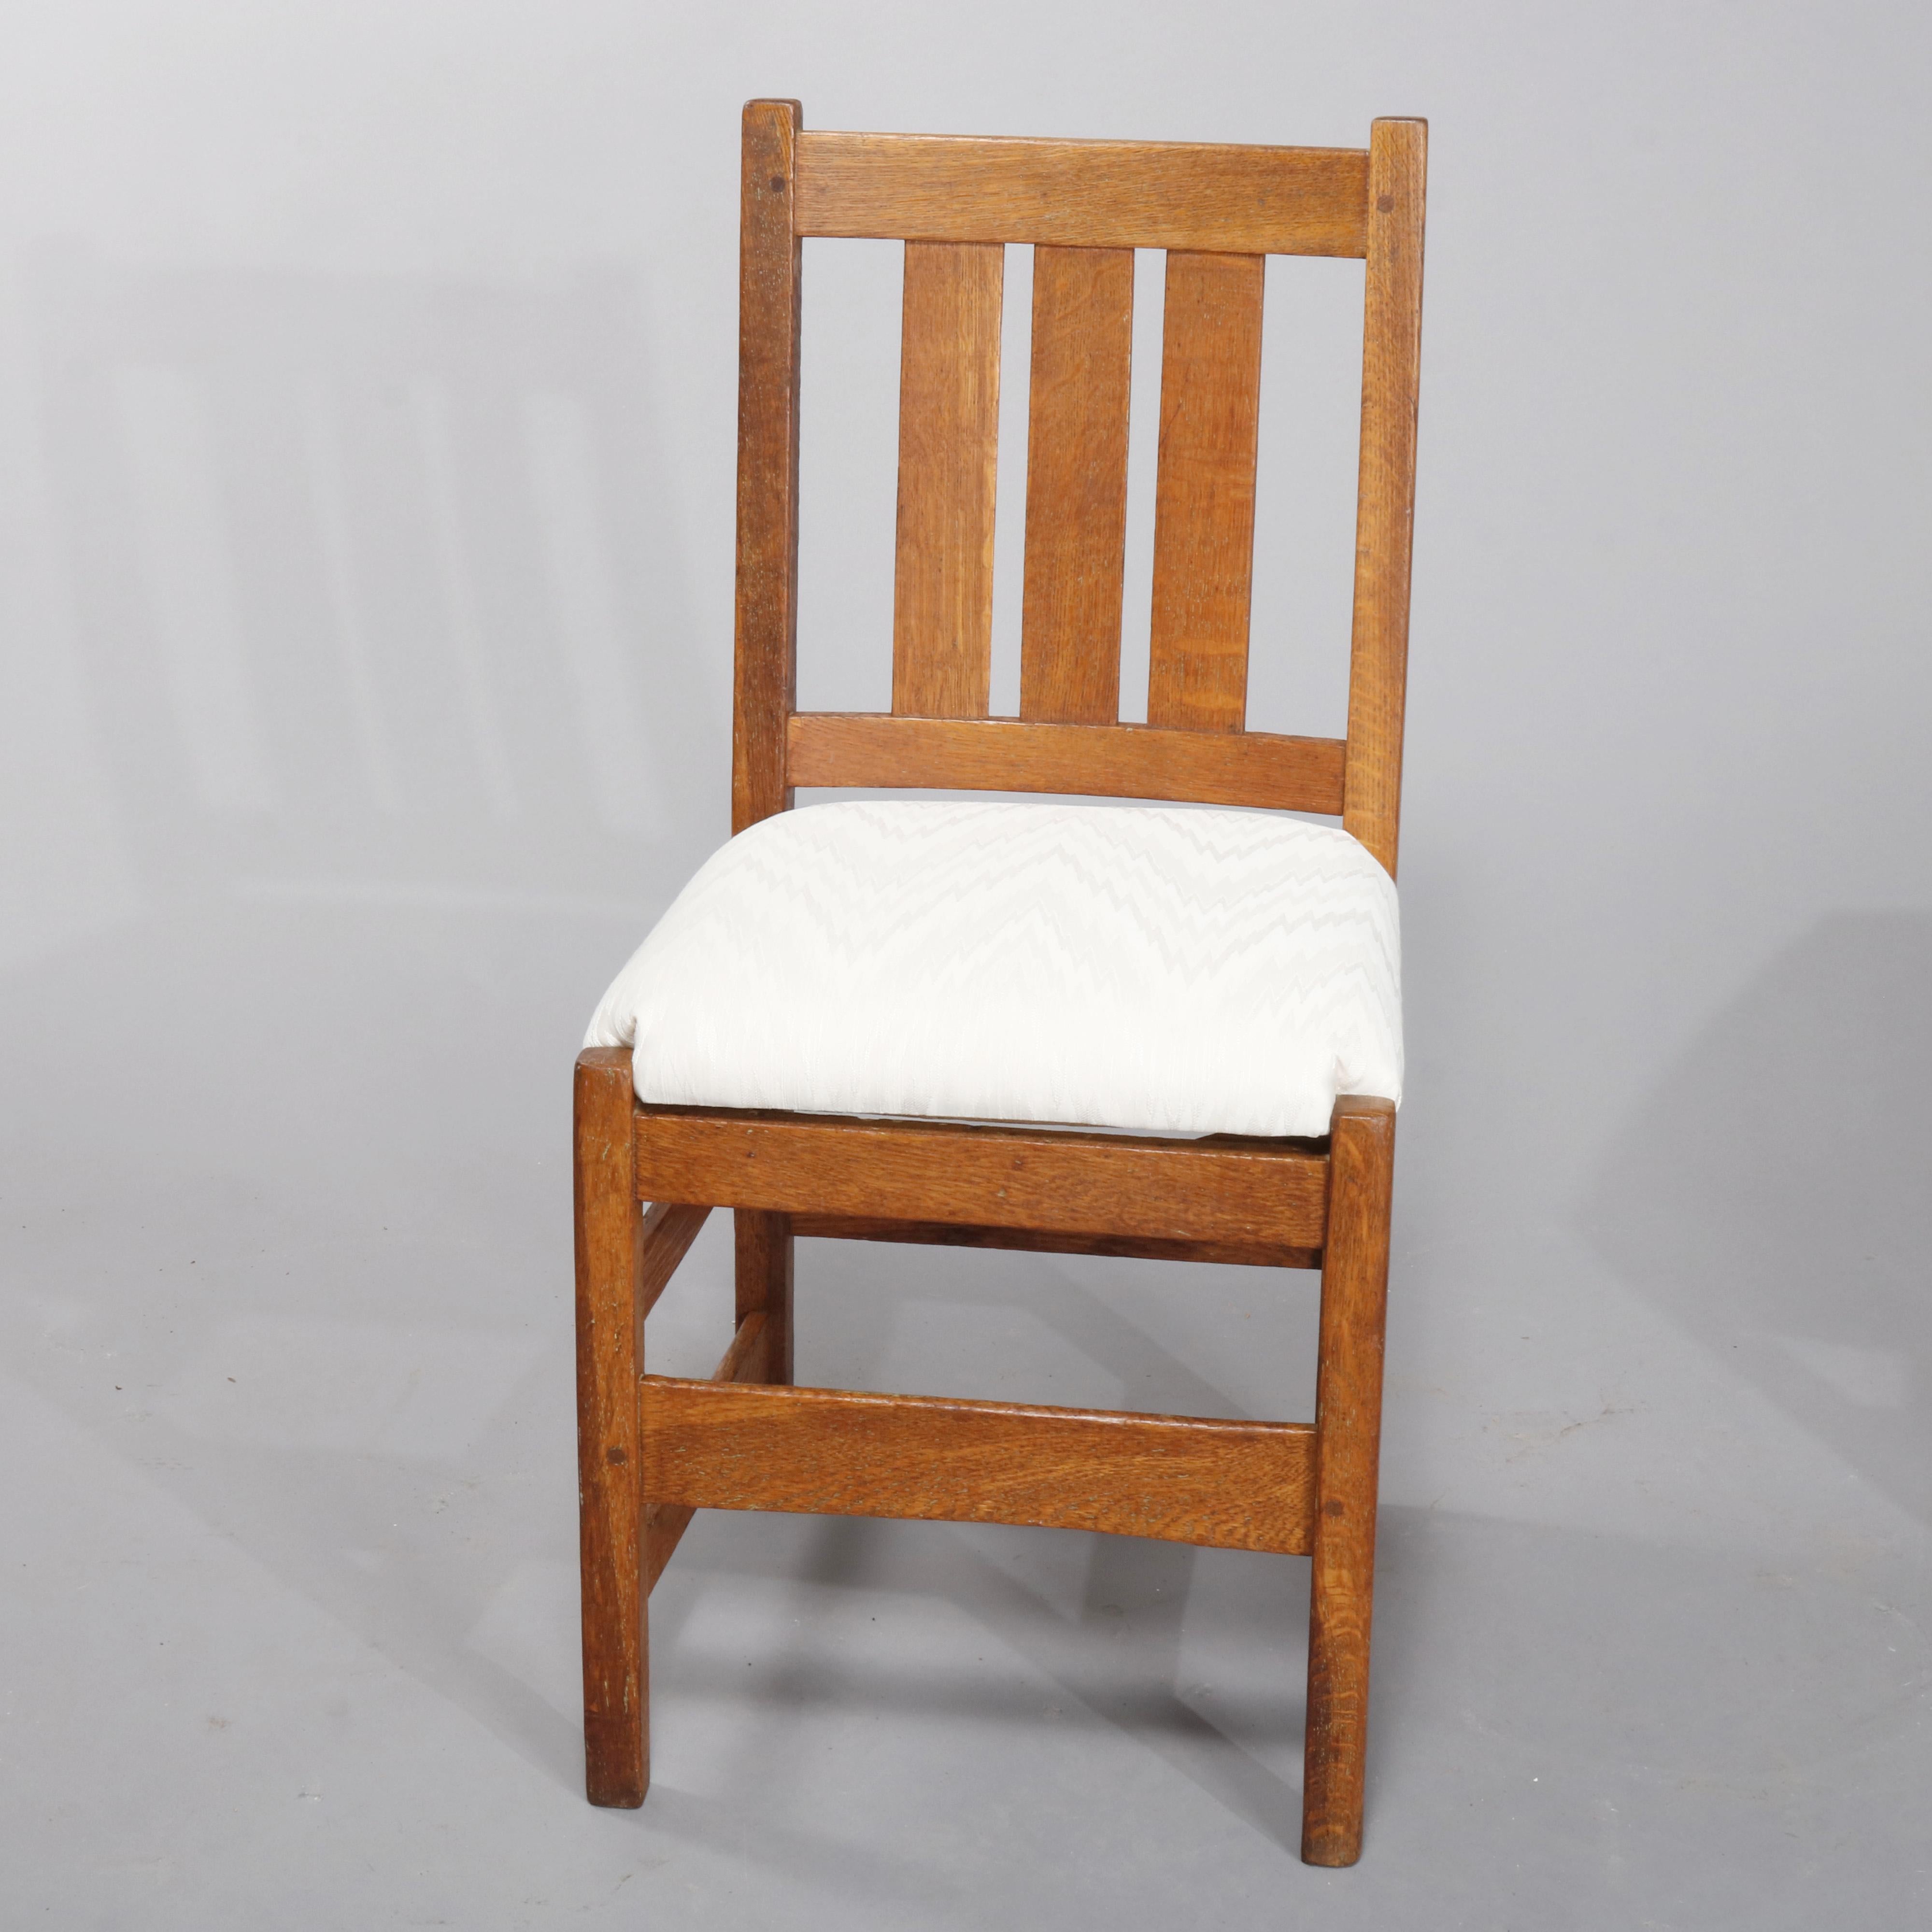 A set of four antique Arts & Crafts Mission dining chairs by L. & J.G. Stickley offers quarter sawn oak construction with slat backs over upholstered seats, raised on straight and square legs, circa 1910

Measures: 35.25